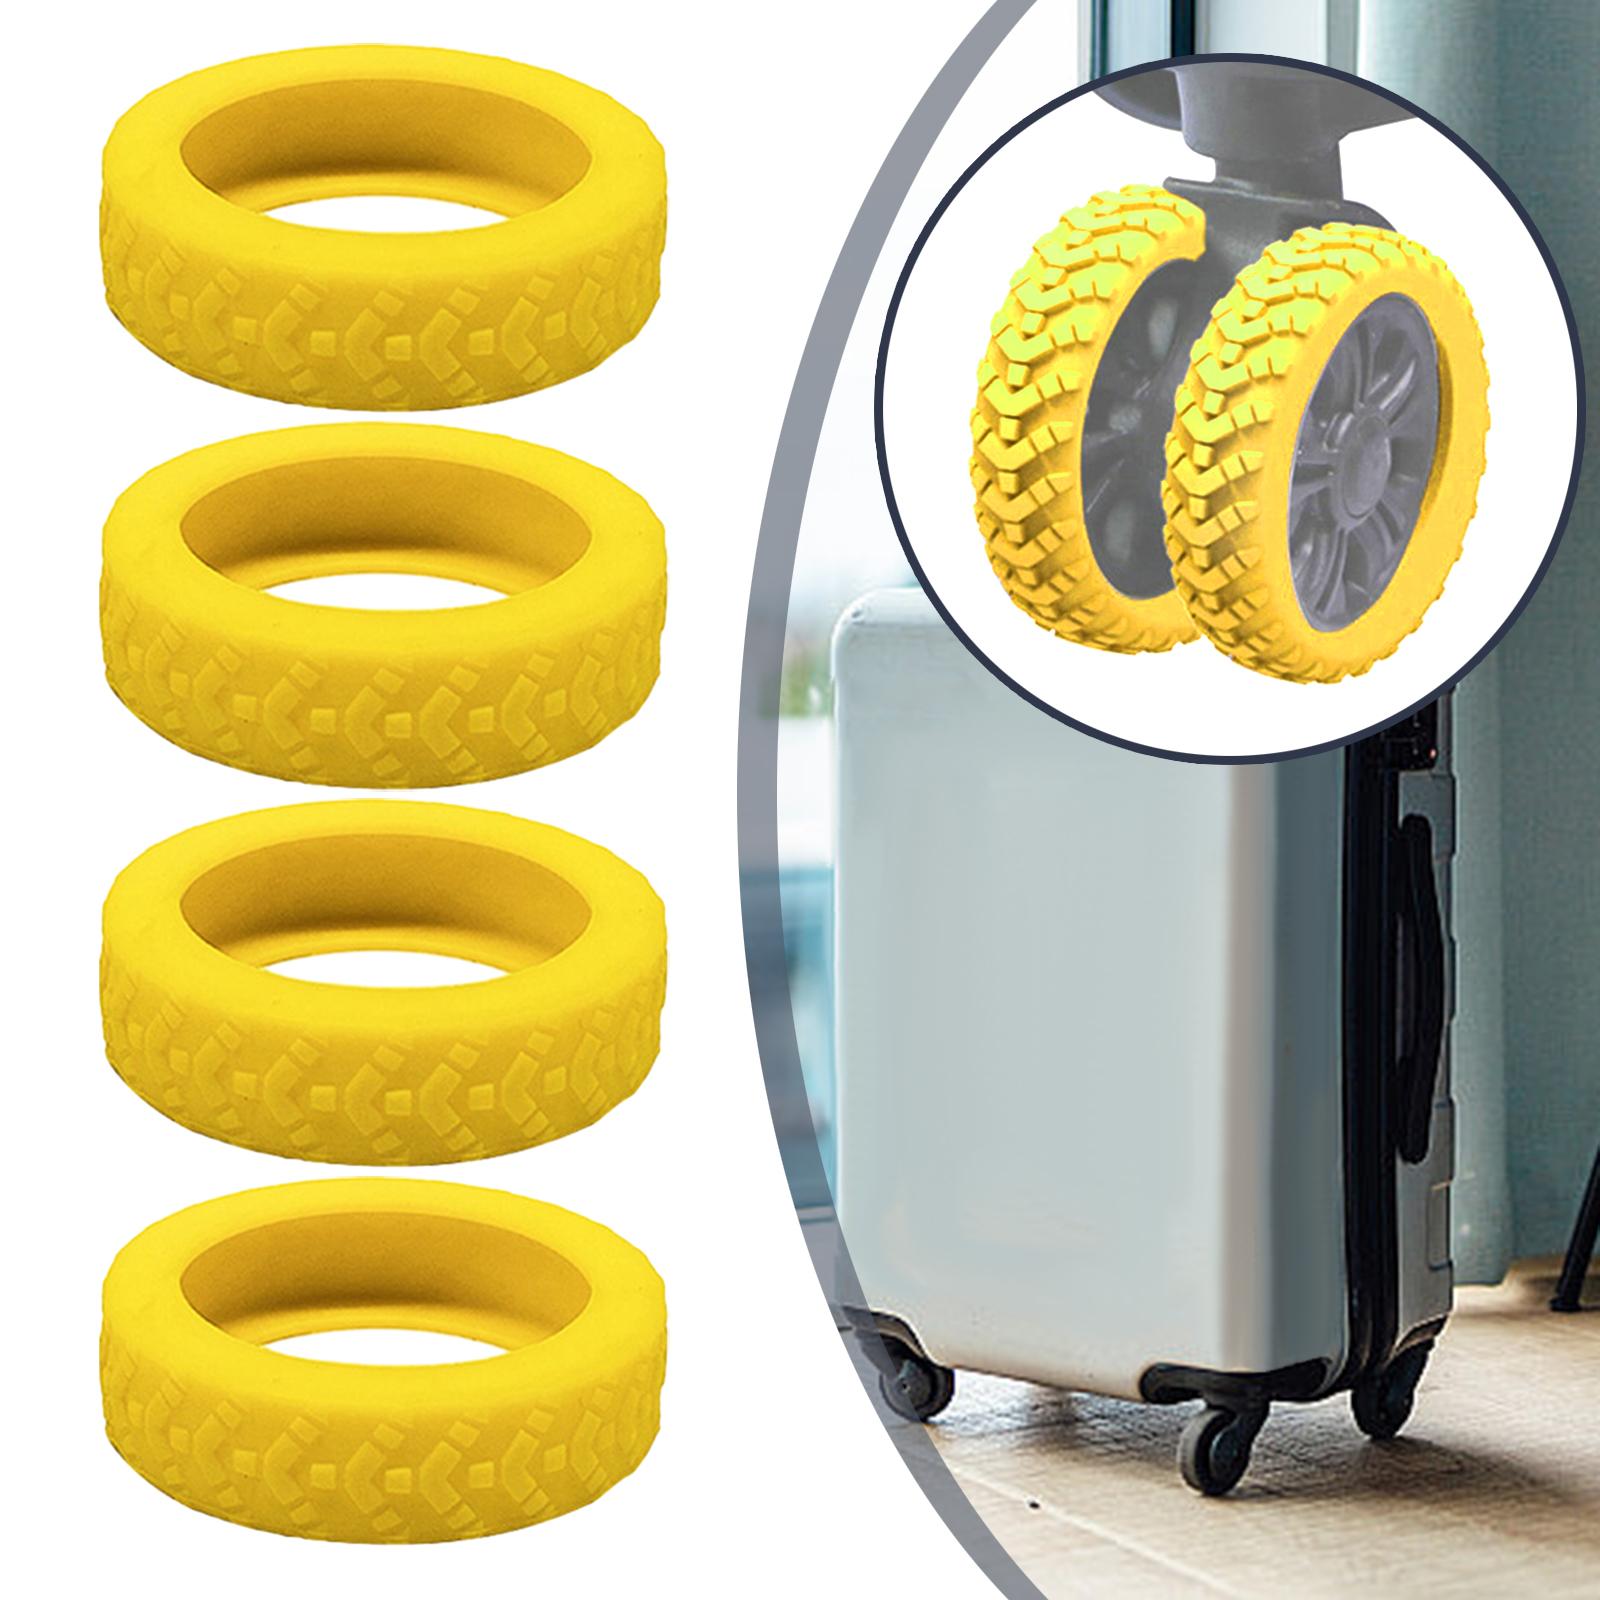 4 Pieces Luggage Wheels Covers Replace Parts Silicone Suitcase Wheels Covers Yellow